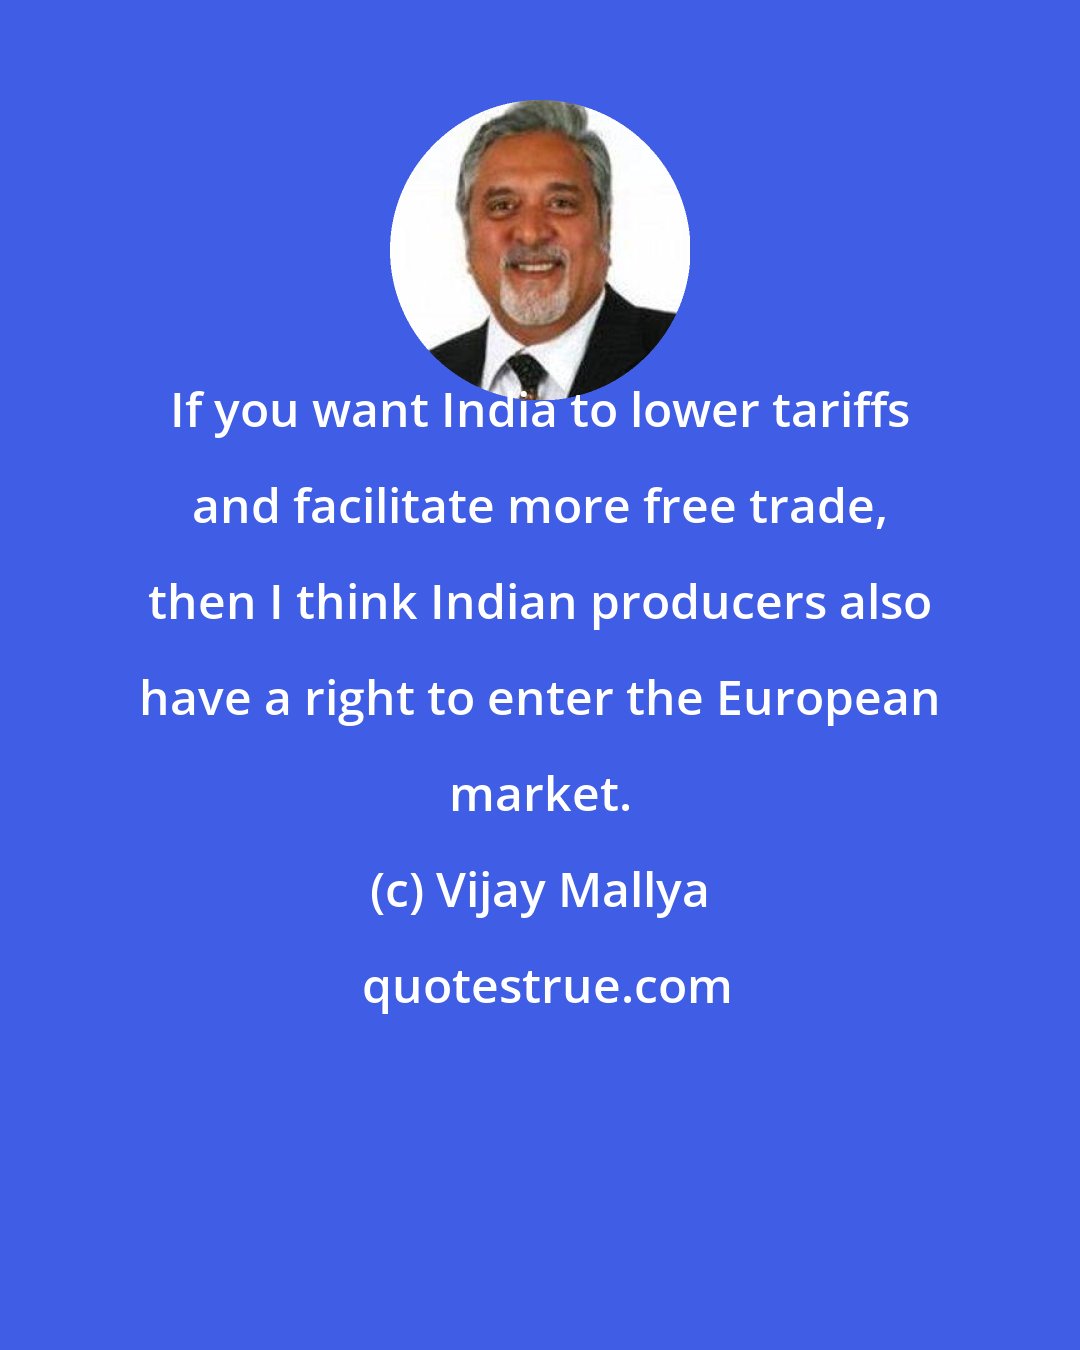 Vijay Mallya: If you want India to lower tariffs and facilitate more free trade, then I think Indian producers also have a right to enter the European market.